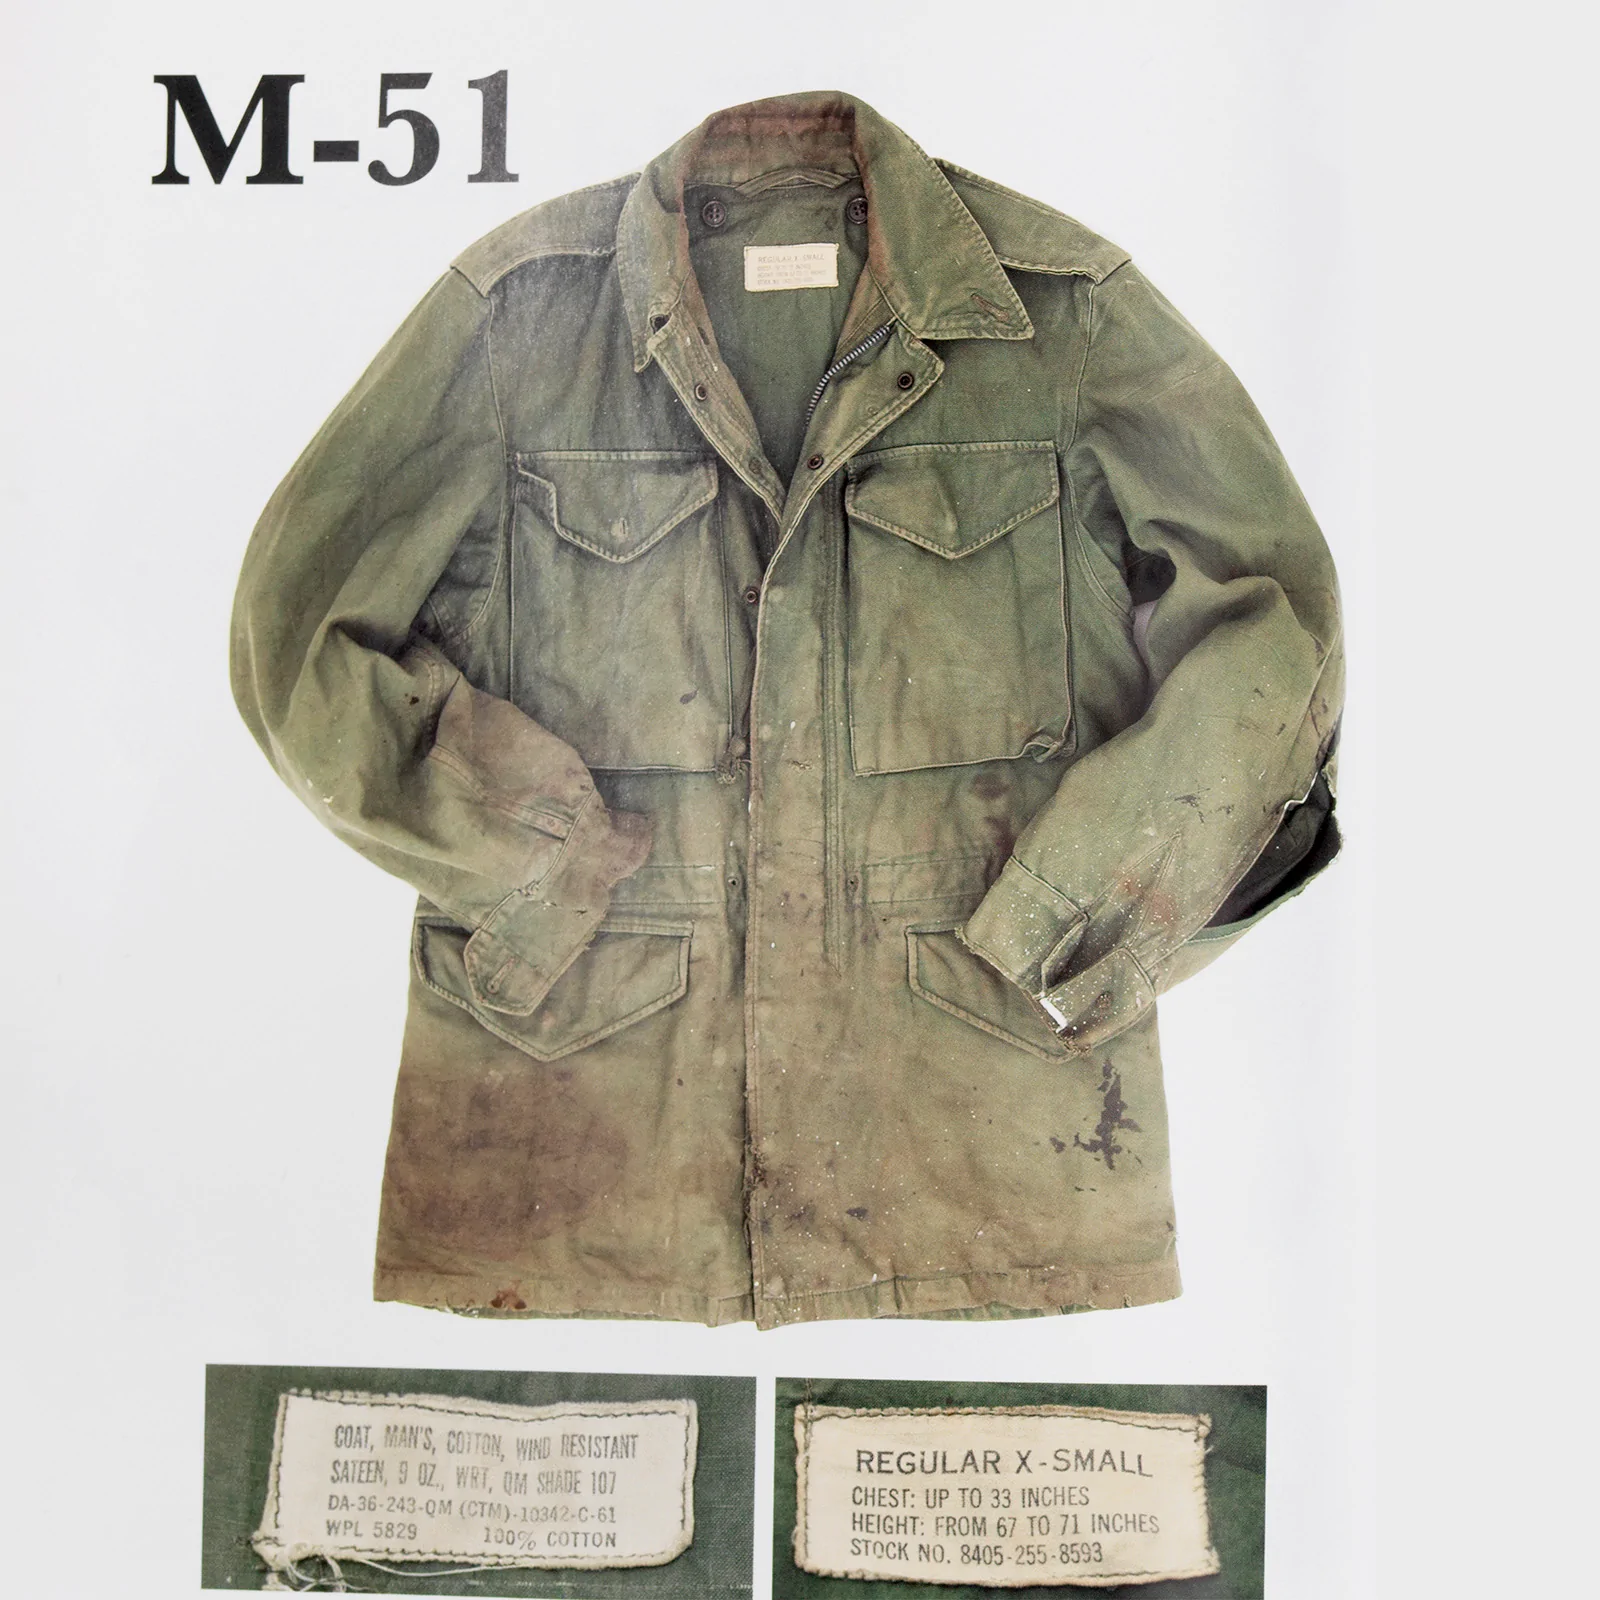 The M-51 field jacket, the predecessor of the M-65 field jacket.